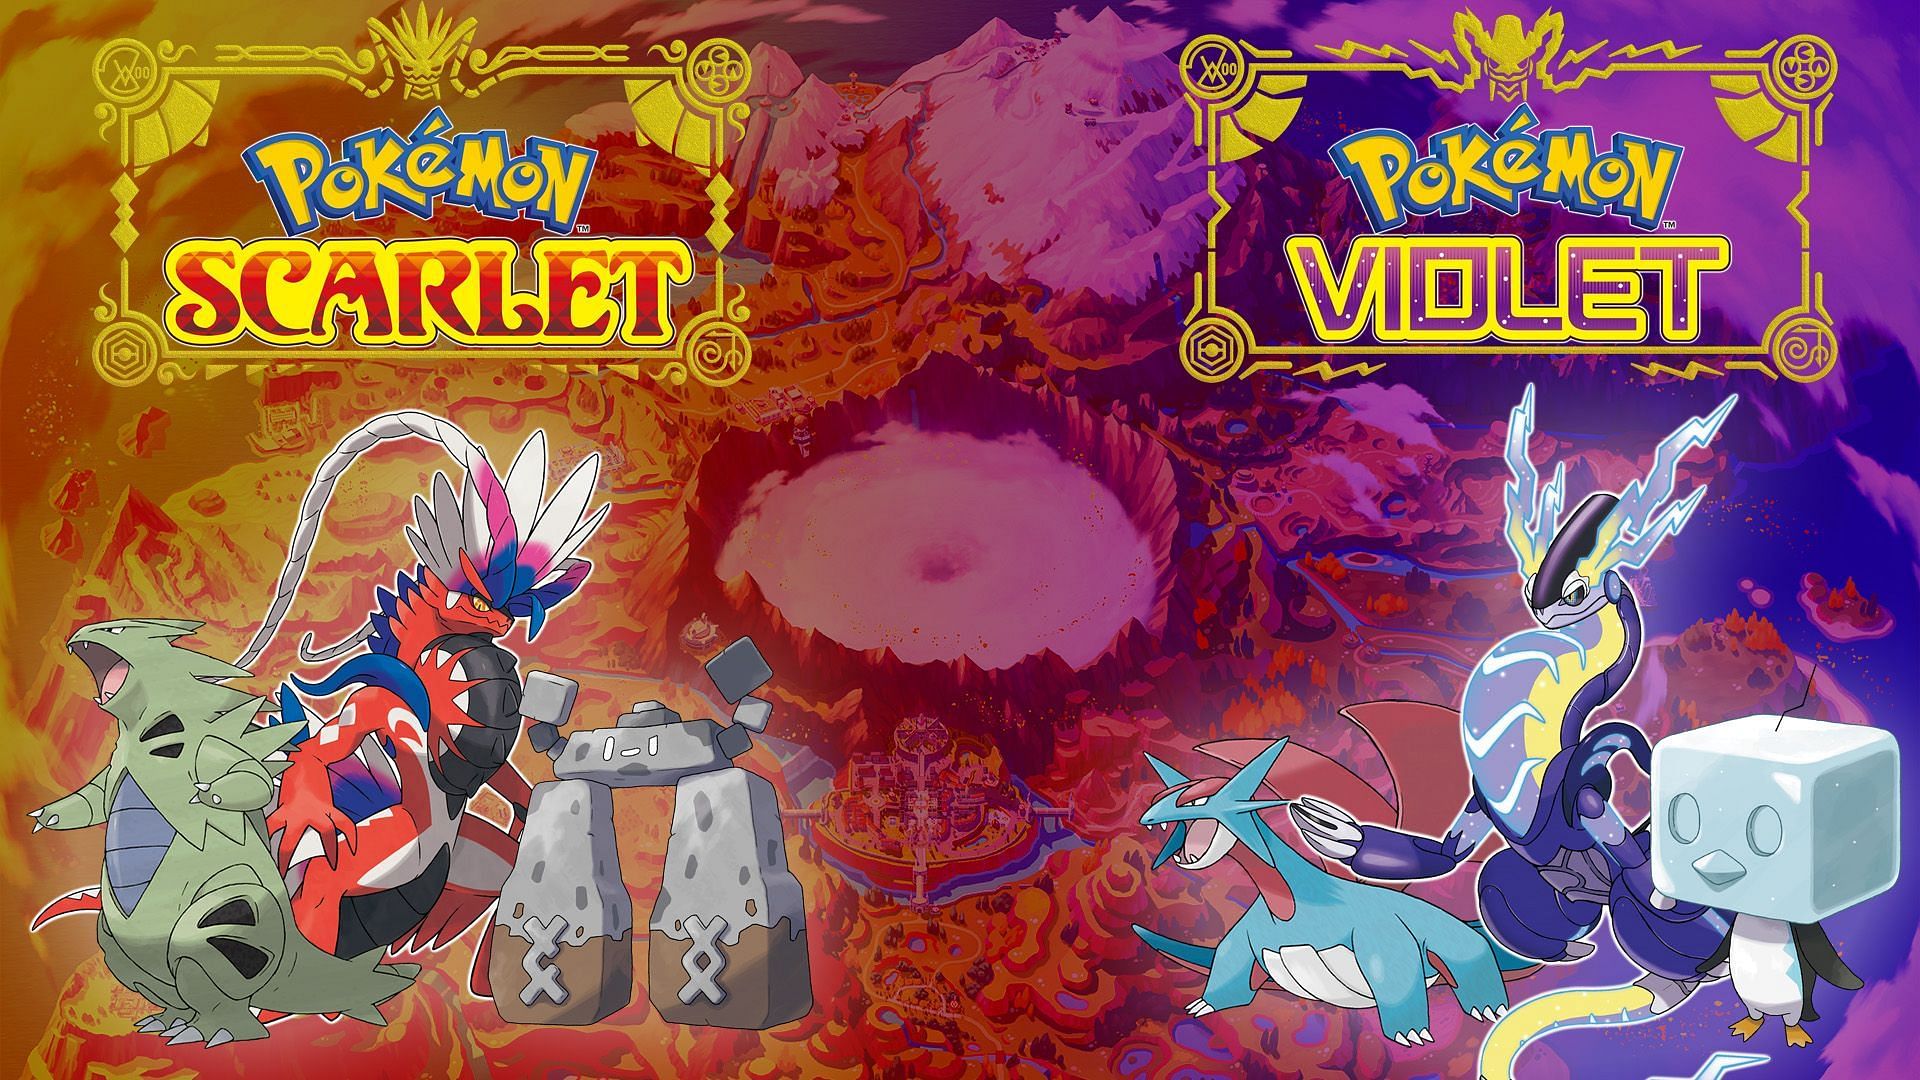 Pokémon Scarlet & Violet: Which Version Really Has The Best Exclusives